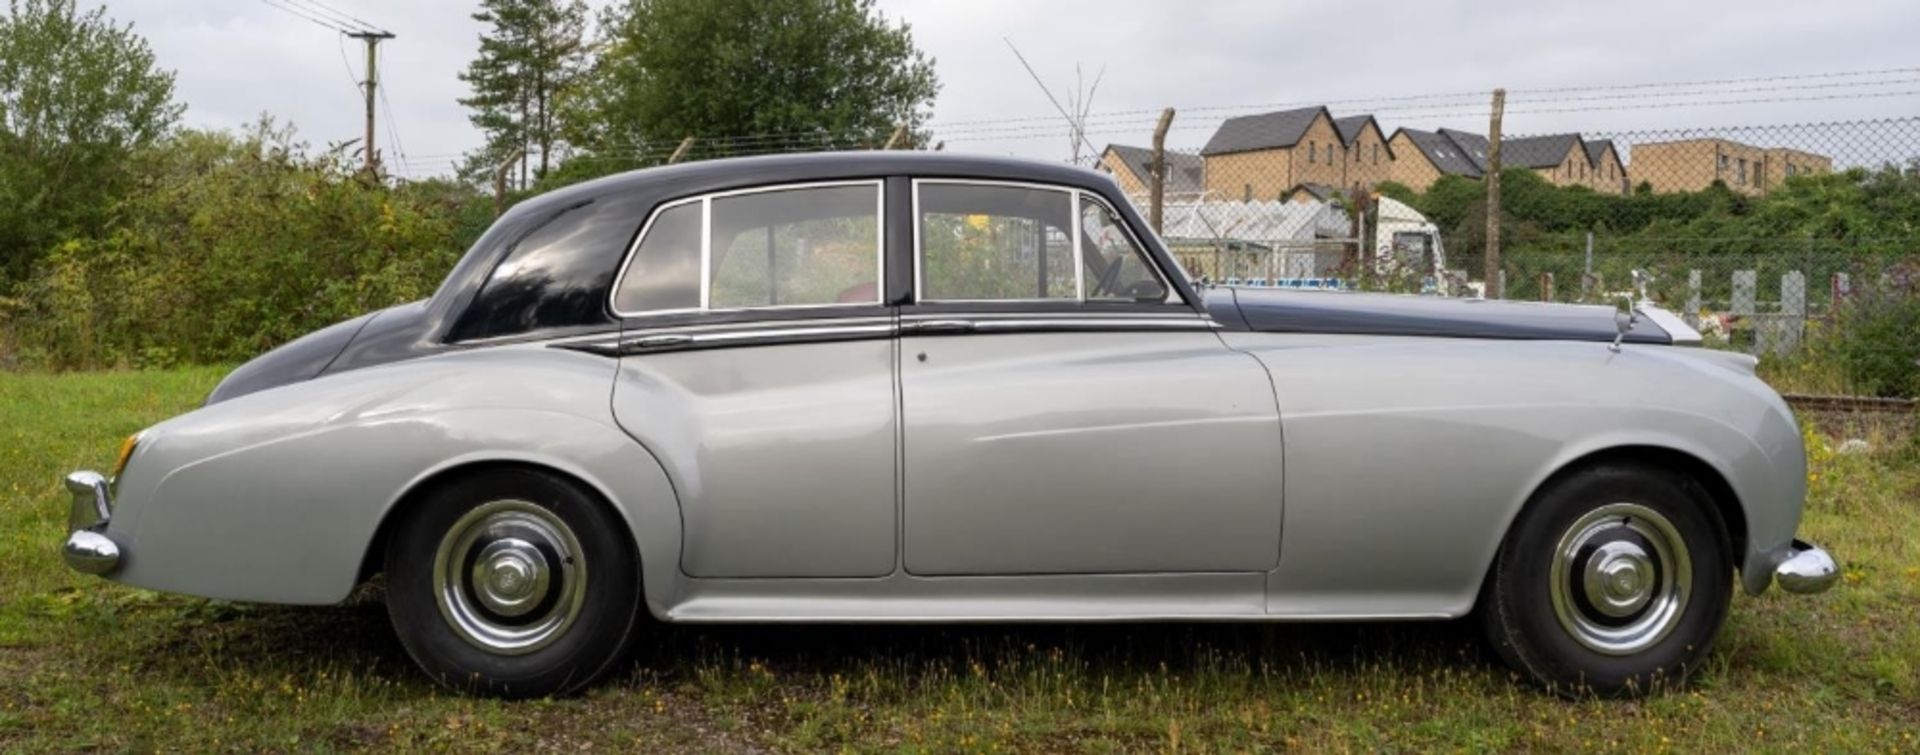 1957 ROLLS-ROYCE SILVER CLOUD Registration Number: YRX 416 Chassis Number: SED429 Recorded - Image 6 of 24